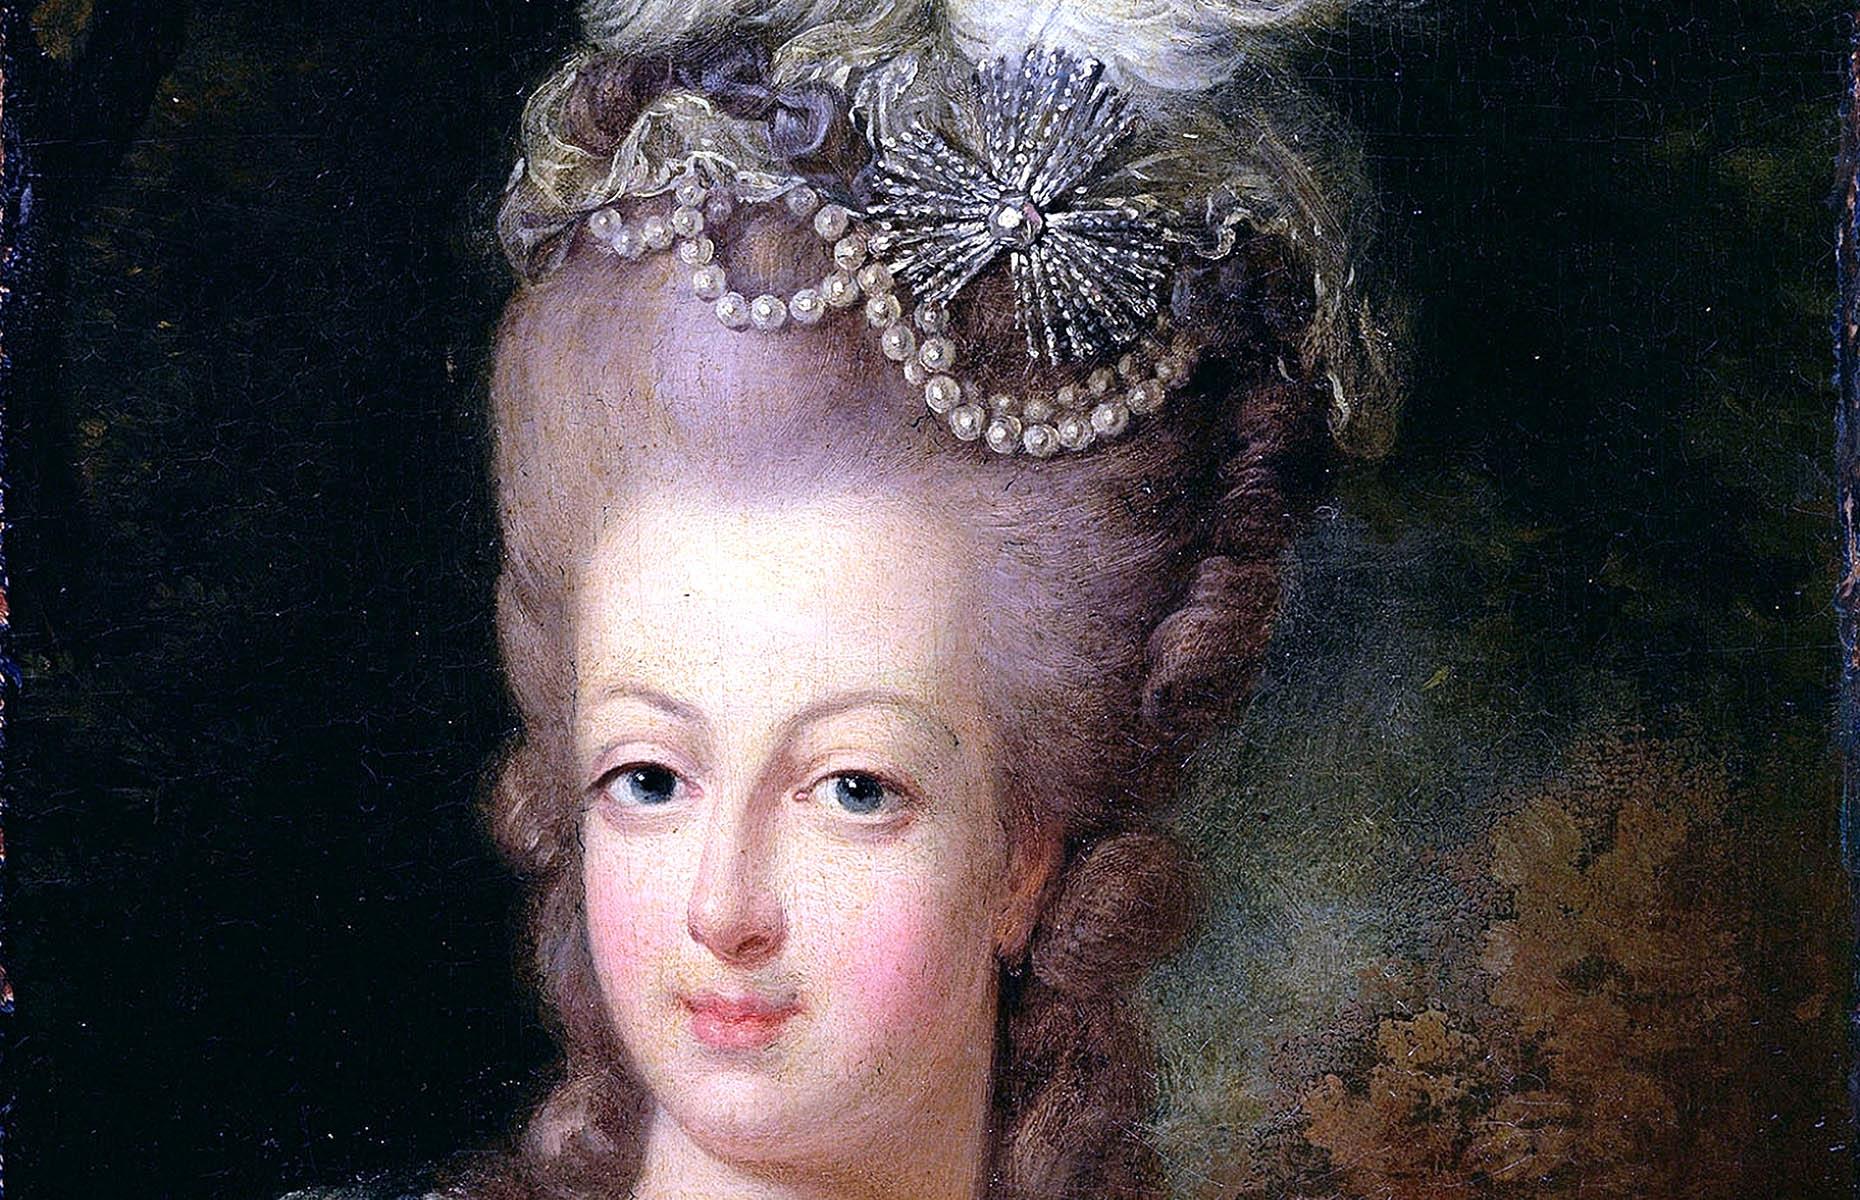 <p>Unsurprisingly, Marie Antoinette had a penchant for jewels and regularly treated herself to eye-wateringly expensive accessories to enhance her fabulous frocks.</p>  <p>Her love of such finery ultimately played a significant role in her downfall, when she became caught up in the infamous "Affair of the Diamond Necklace" scandal...</p>